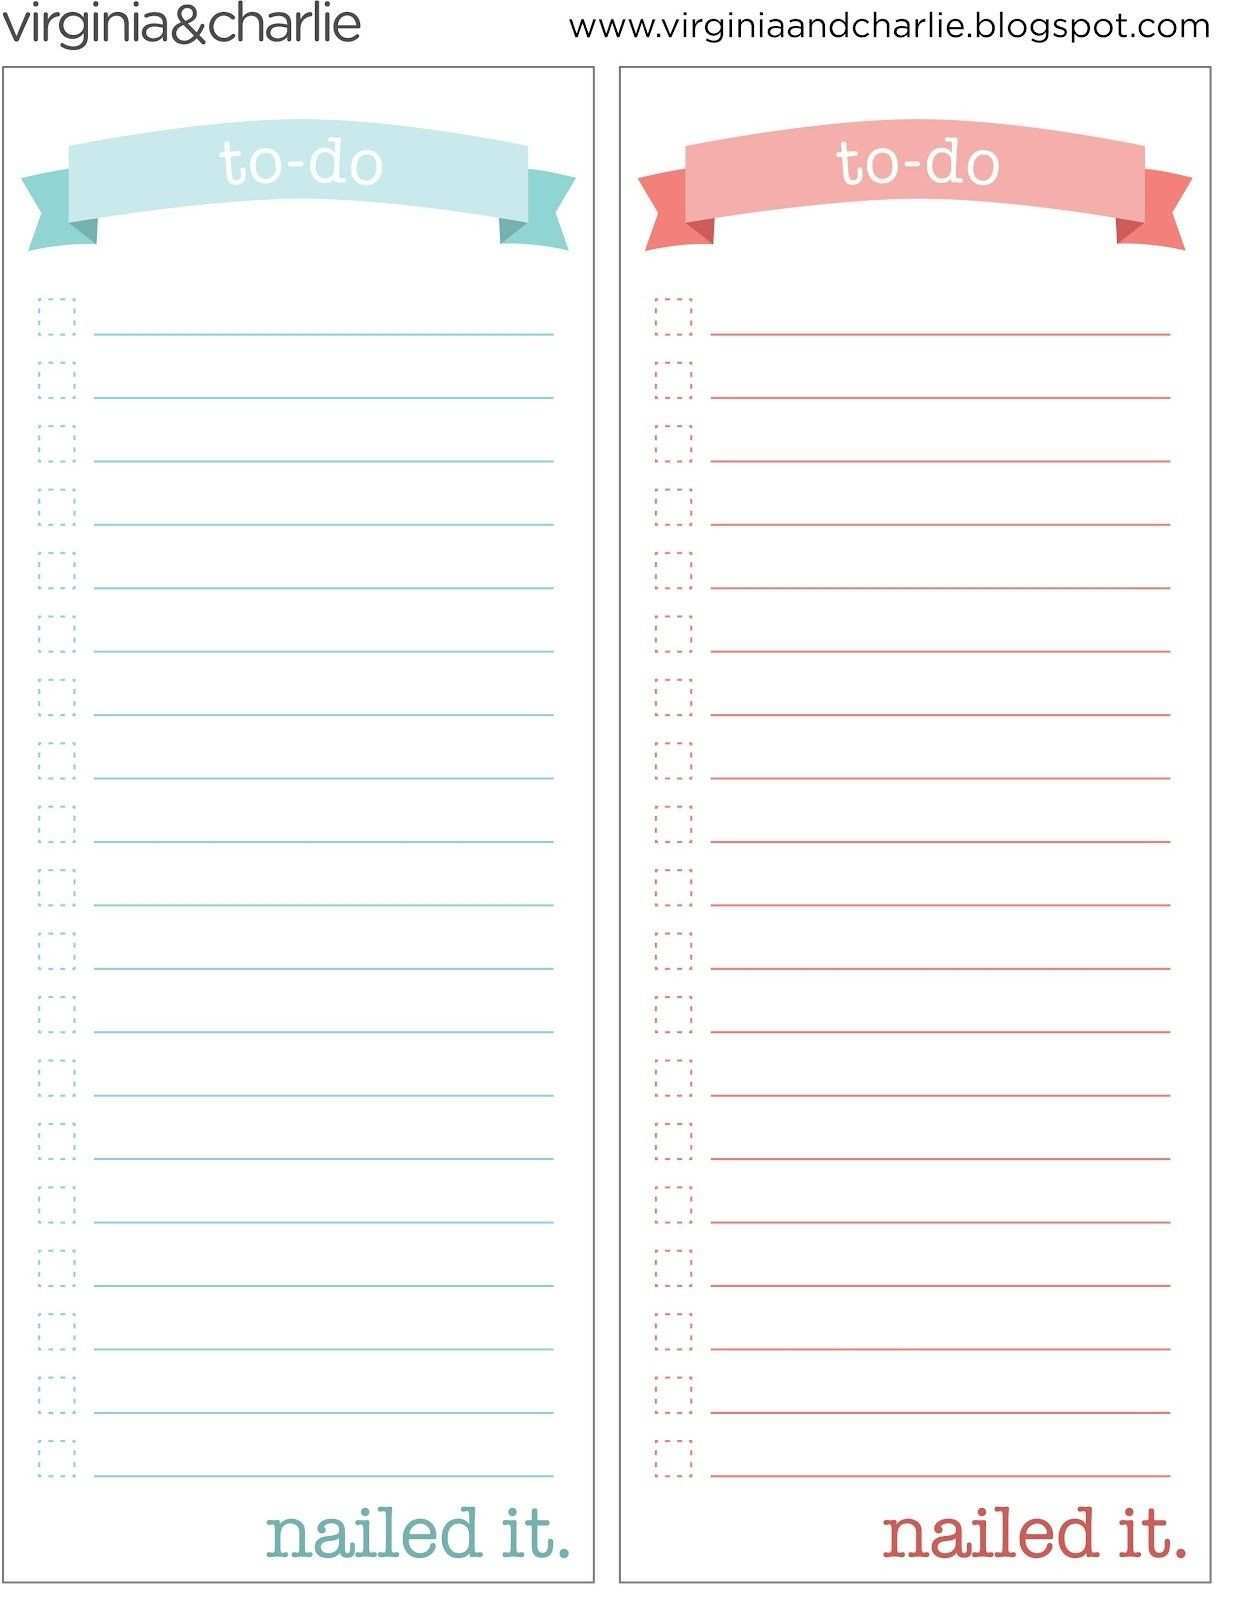 Things To Do Template Pdf Virginia And Charlie Printable To Do Intended For Free Printable To Do List Pd To Do Lists Printable List Template Free To Do List